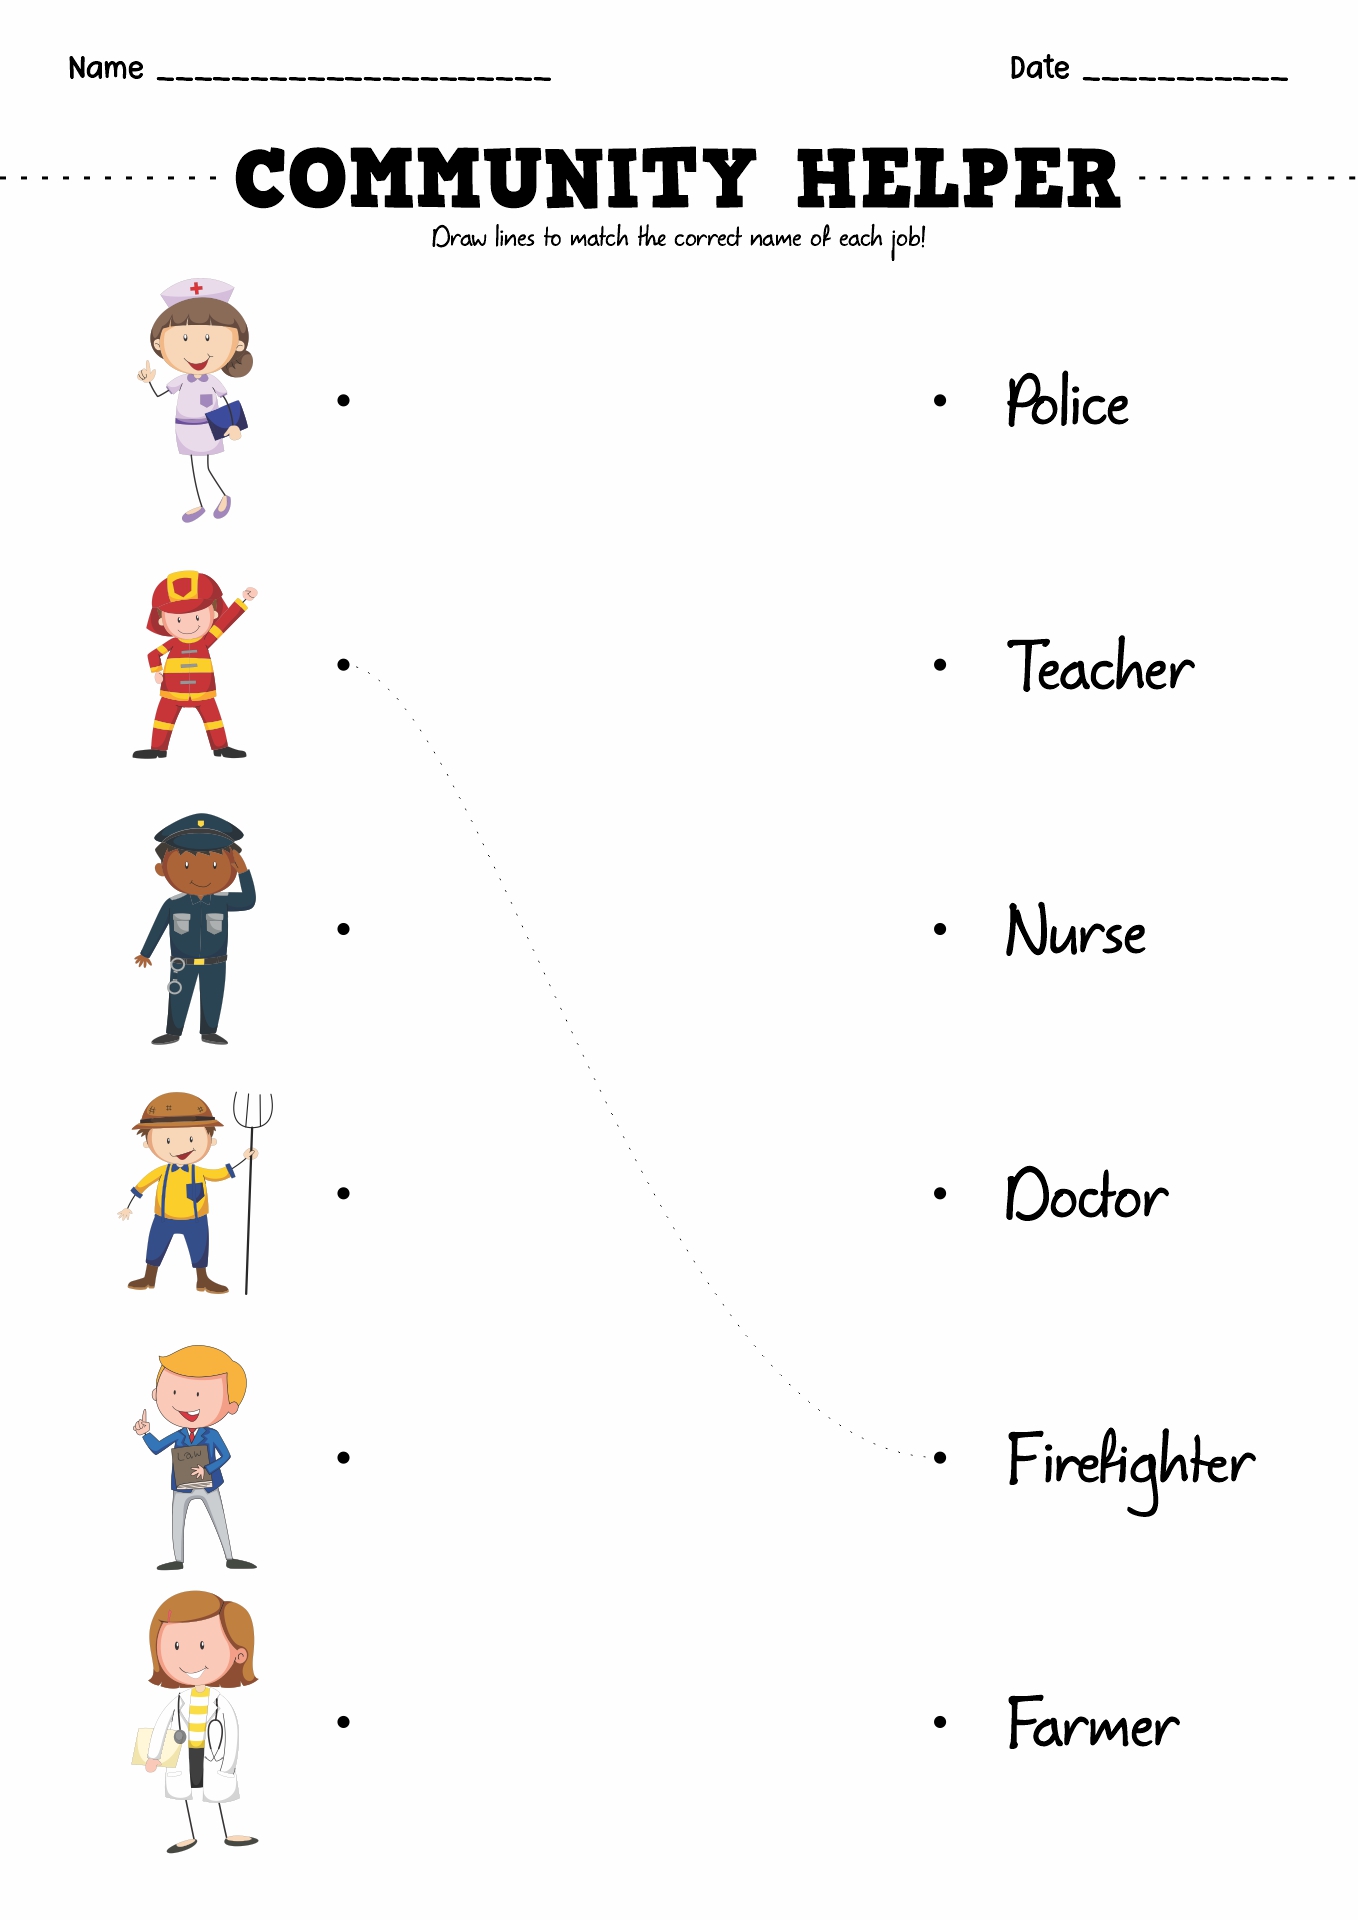 14-best-images-of-jobs-occupations-for-kids-worksheets-community